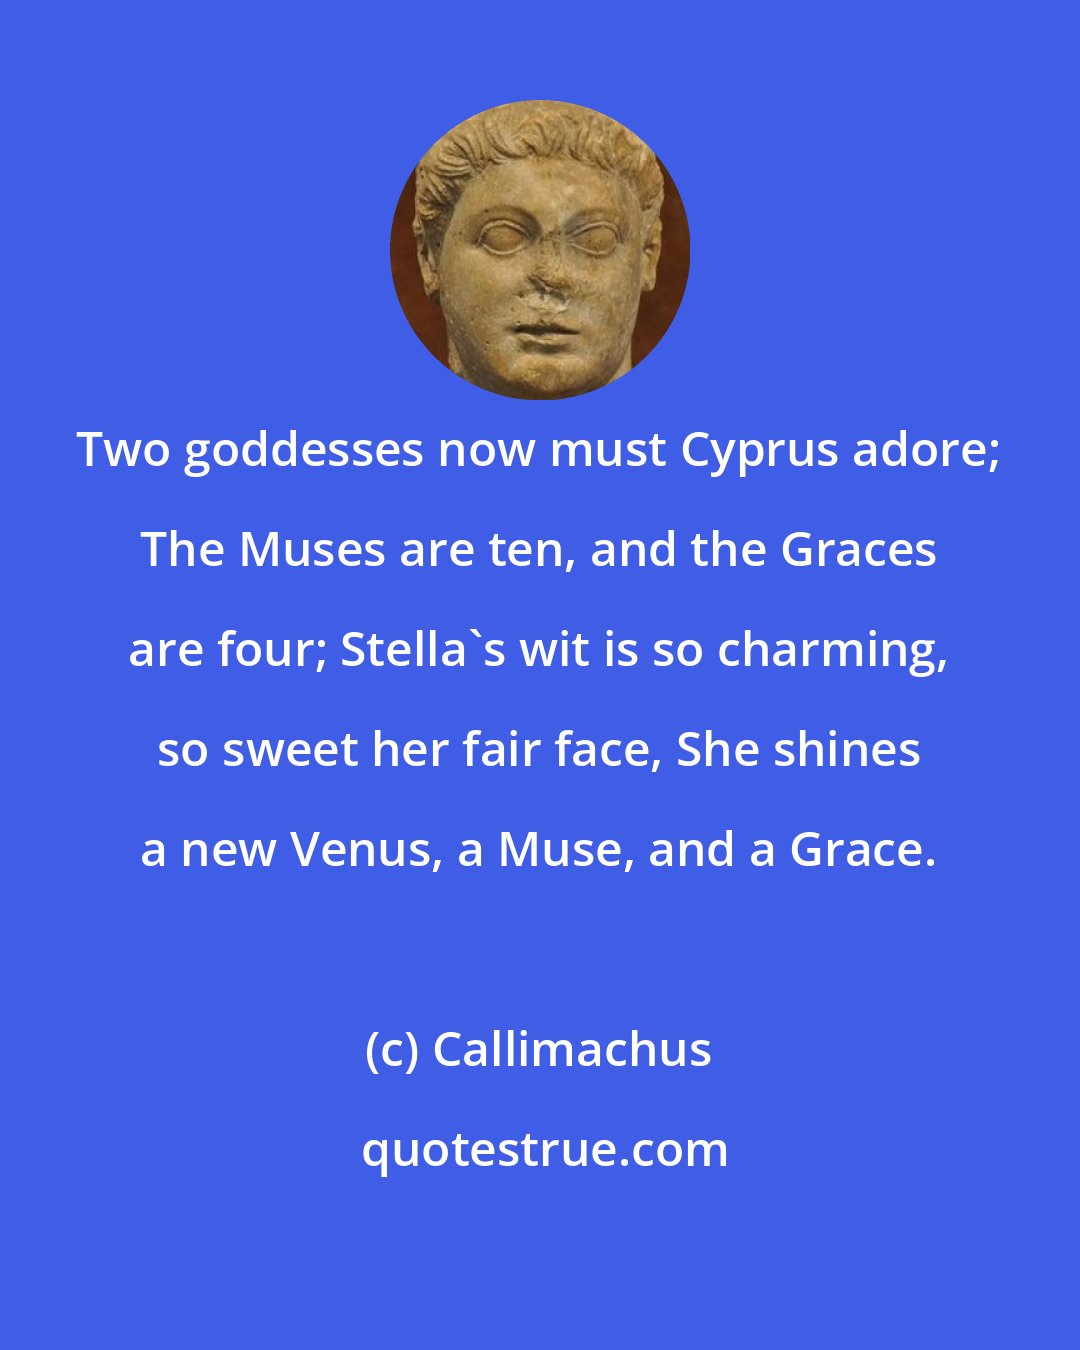 Callimachus: Two goddesses now must Cyprus adore; The Muses are ten, and the Graces are four; Stella's wit is so charming, so sweet her fair face, She shines a new Venus, a Muse, and a Grace.